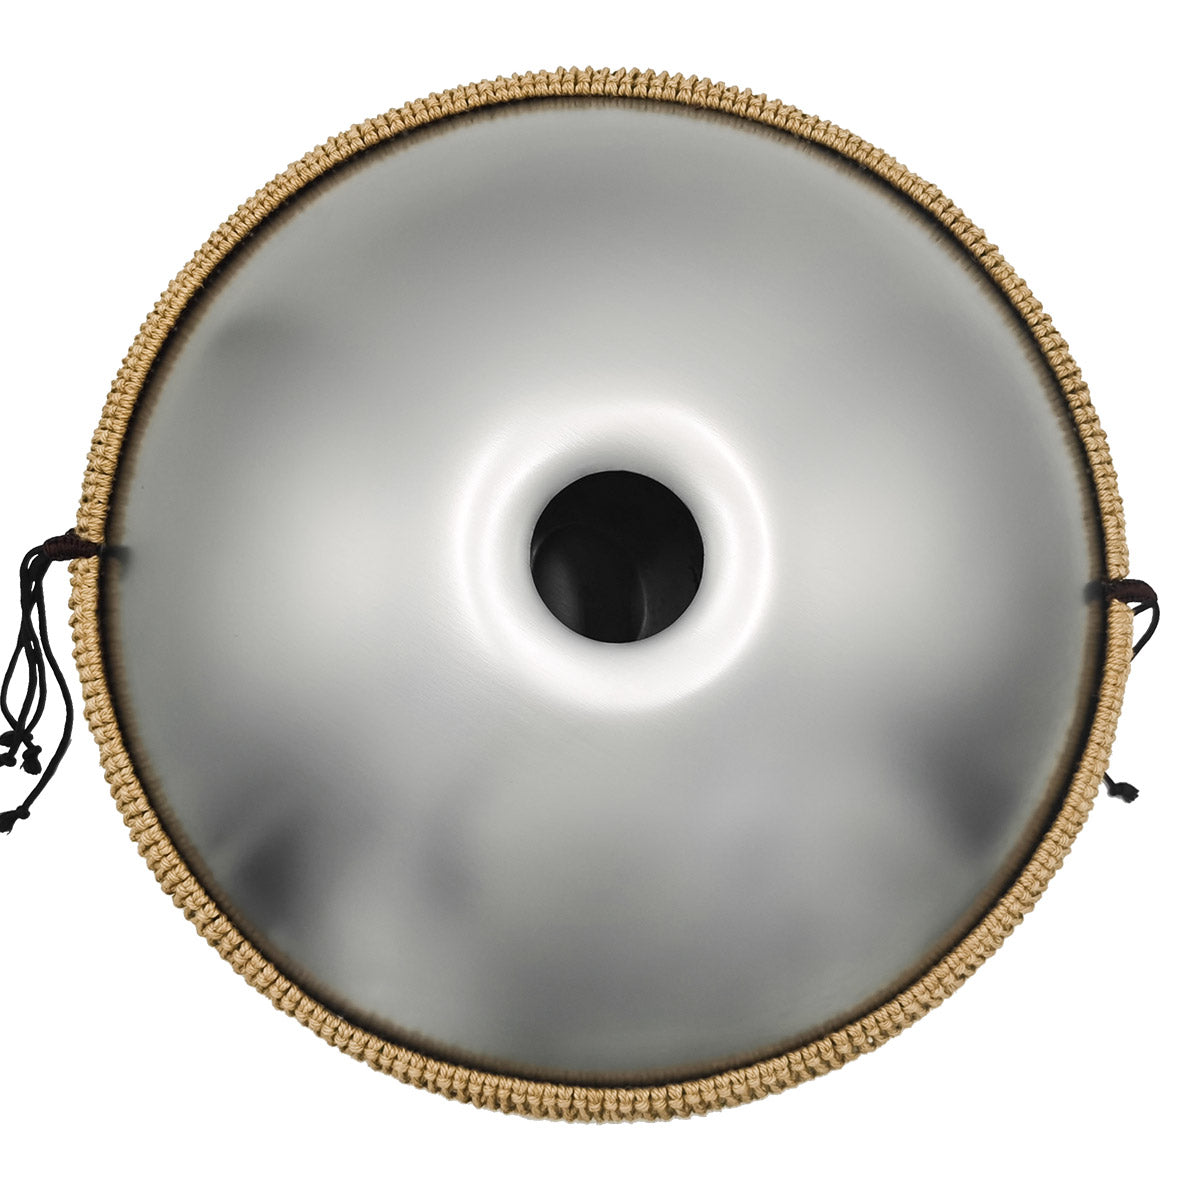 MiSoundofNature STL Handpan Drum Sterling Silver 22 Inches 10 Notes D Minor Kurd Scale Hangdrum